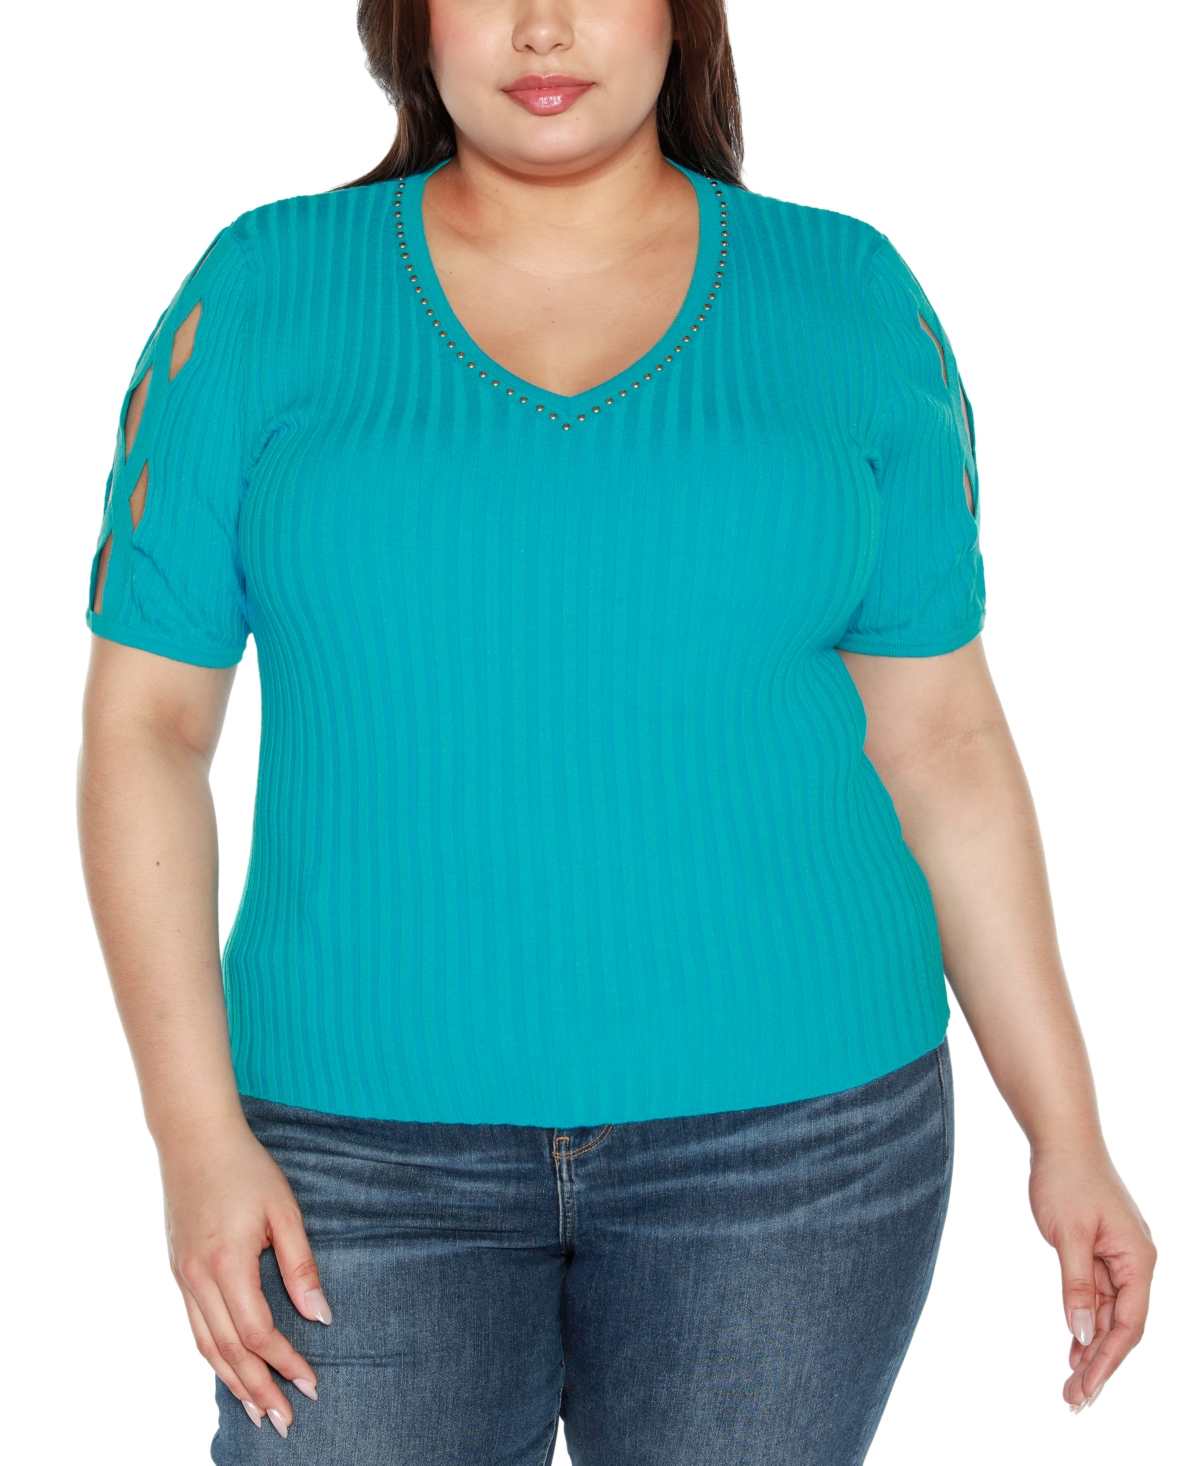 Belldini Black Label Plus Size Embellished Criss Cross Sleeve Sweater In Blue Bliss